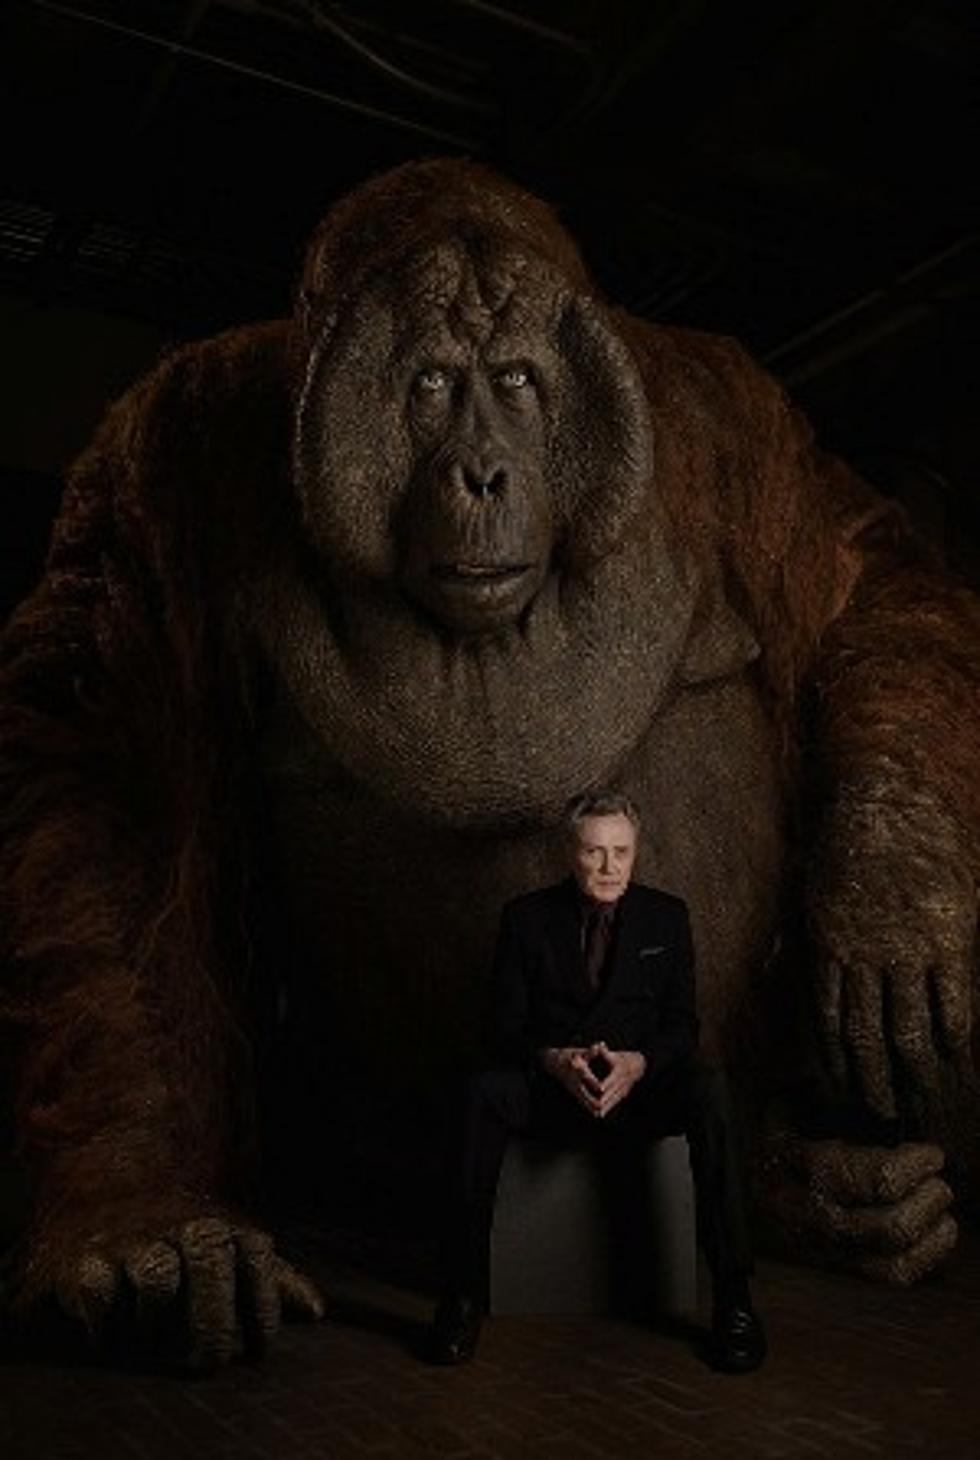 &#8216;Jungle Book&#8217; Easter Egg Ties Saturday Night Live Sketch To &#8216;King Louie&#8217; Played By Christopher Walken